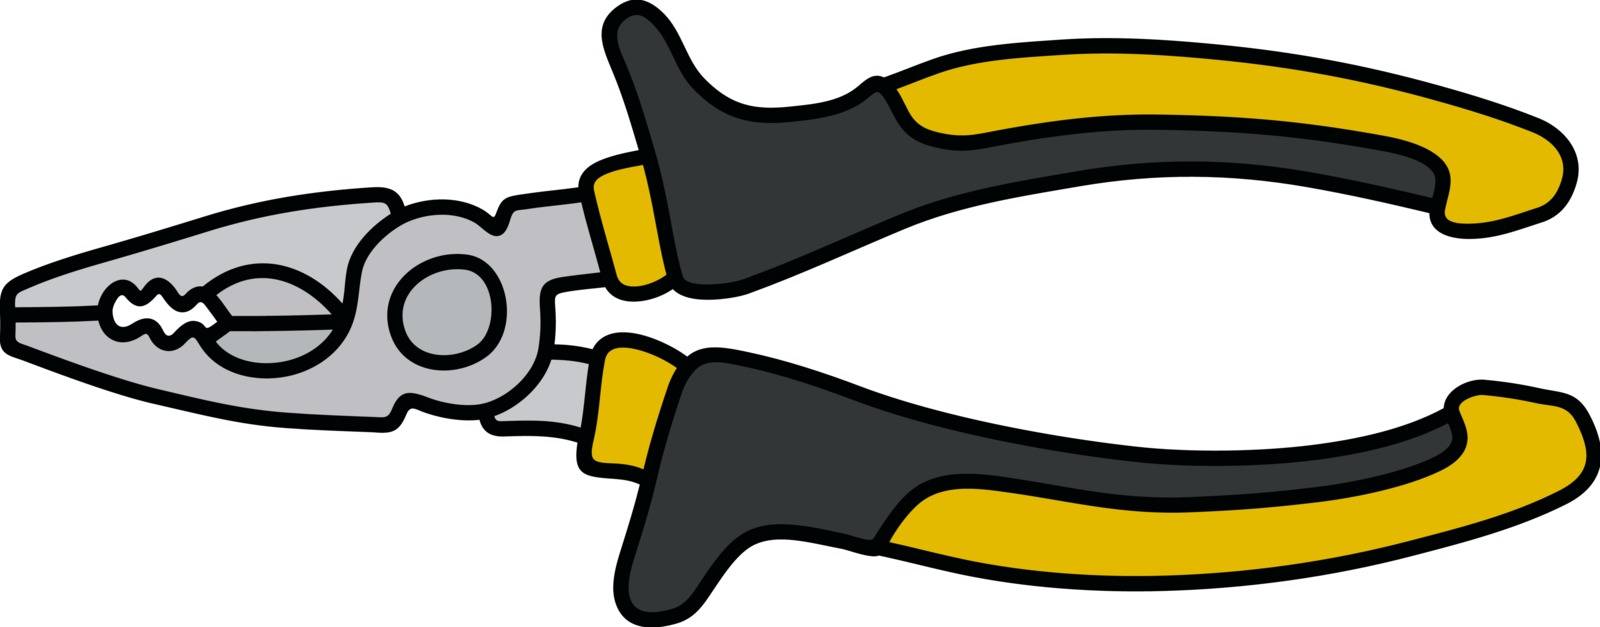 The hand drawing of a combination pliers with black and yellow handle